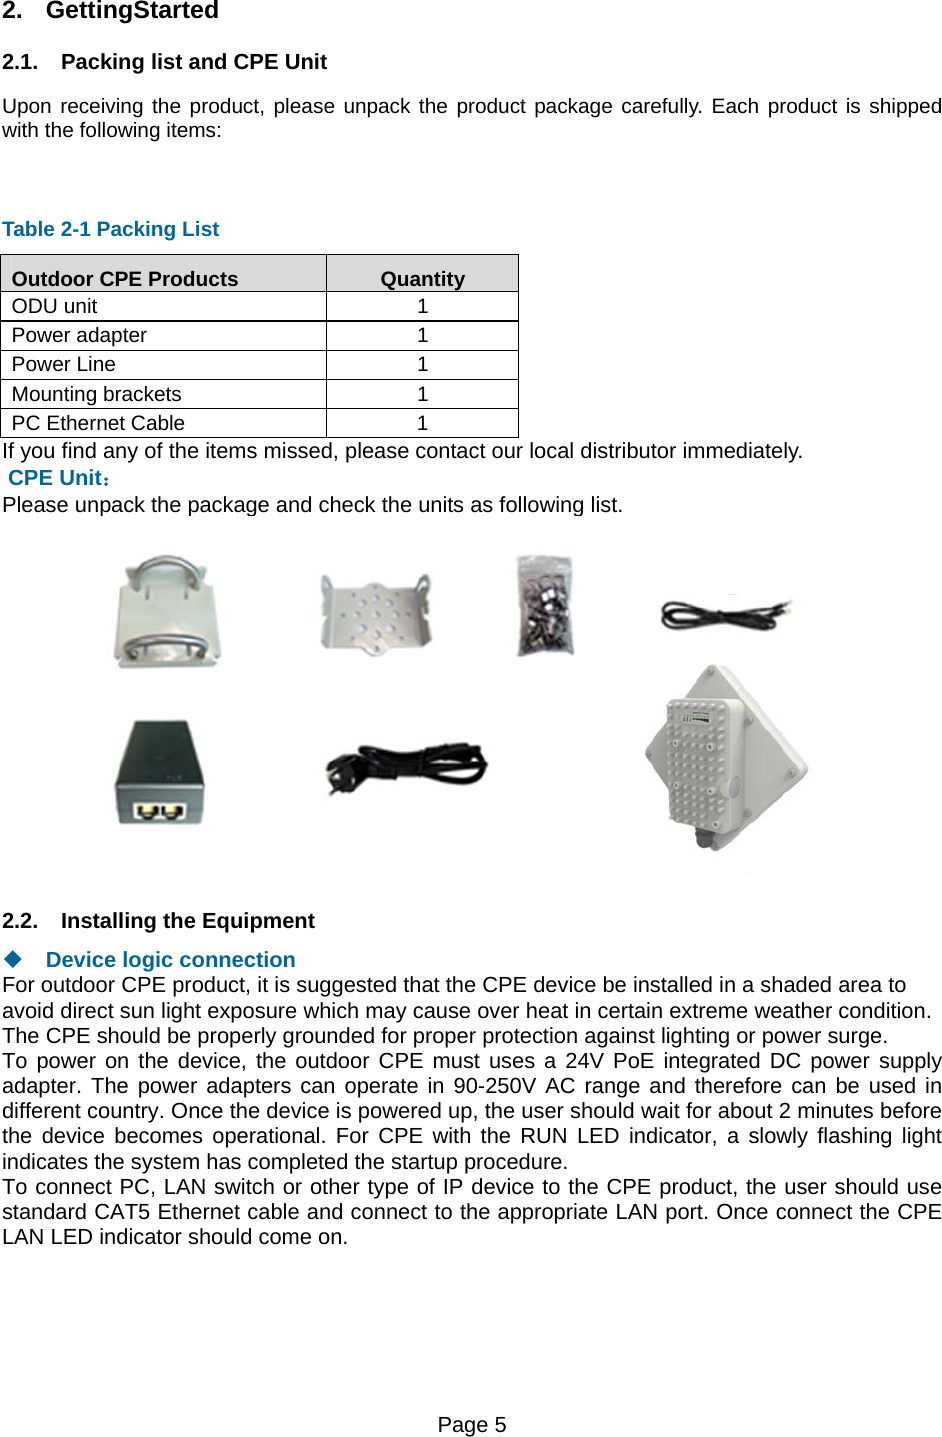 Page 5   2. GettingStarted   2.1.  Packing list and CPE Unit Upon receiving the product, please unpack the product package carefully. Each product is shipped with the following items:    Table 2-1 Packing List Outdoor CPE Products  Quantity ODU unit  1 Power adapter  1 Power Line  1 Mounting brackets  1 PC Ethernet Cable  1 If you find any of the items missed, please contact our local distributor immediately.  CPE Unit： Please unpack the package and check the units as following list.  2.2.  Installing the Equipment   Device logic connection For outdoor CPE product, it is suggested that the CPE device be installed in a shaded area to avoid direct sun light exposure which may cause over heat in certain extreme weather condition. The CPE should be properly grounded for proper protection against lighting or power surge. To power on the device, the outdoor CPE must uses a 24V PoE integrated DC power supply adapter. The power adapters can operate in 90-250V AC range and therefore can be used in different country. Once the device is powered up, the user should wait for about 2 minutes before the device becomes operational. For CPE with the RUN LED indicator, a slowly flashing light indicates the system has completed the startup procedure.   To connect PC, LAN switch or other type of IP device to the CPE product, the user should use standard CAT5 Ethernet cable and connect to the appropriate LAN port. Once connect the CPE LAN LED indicator should come on.  